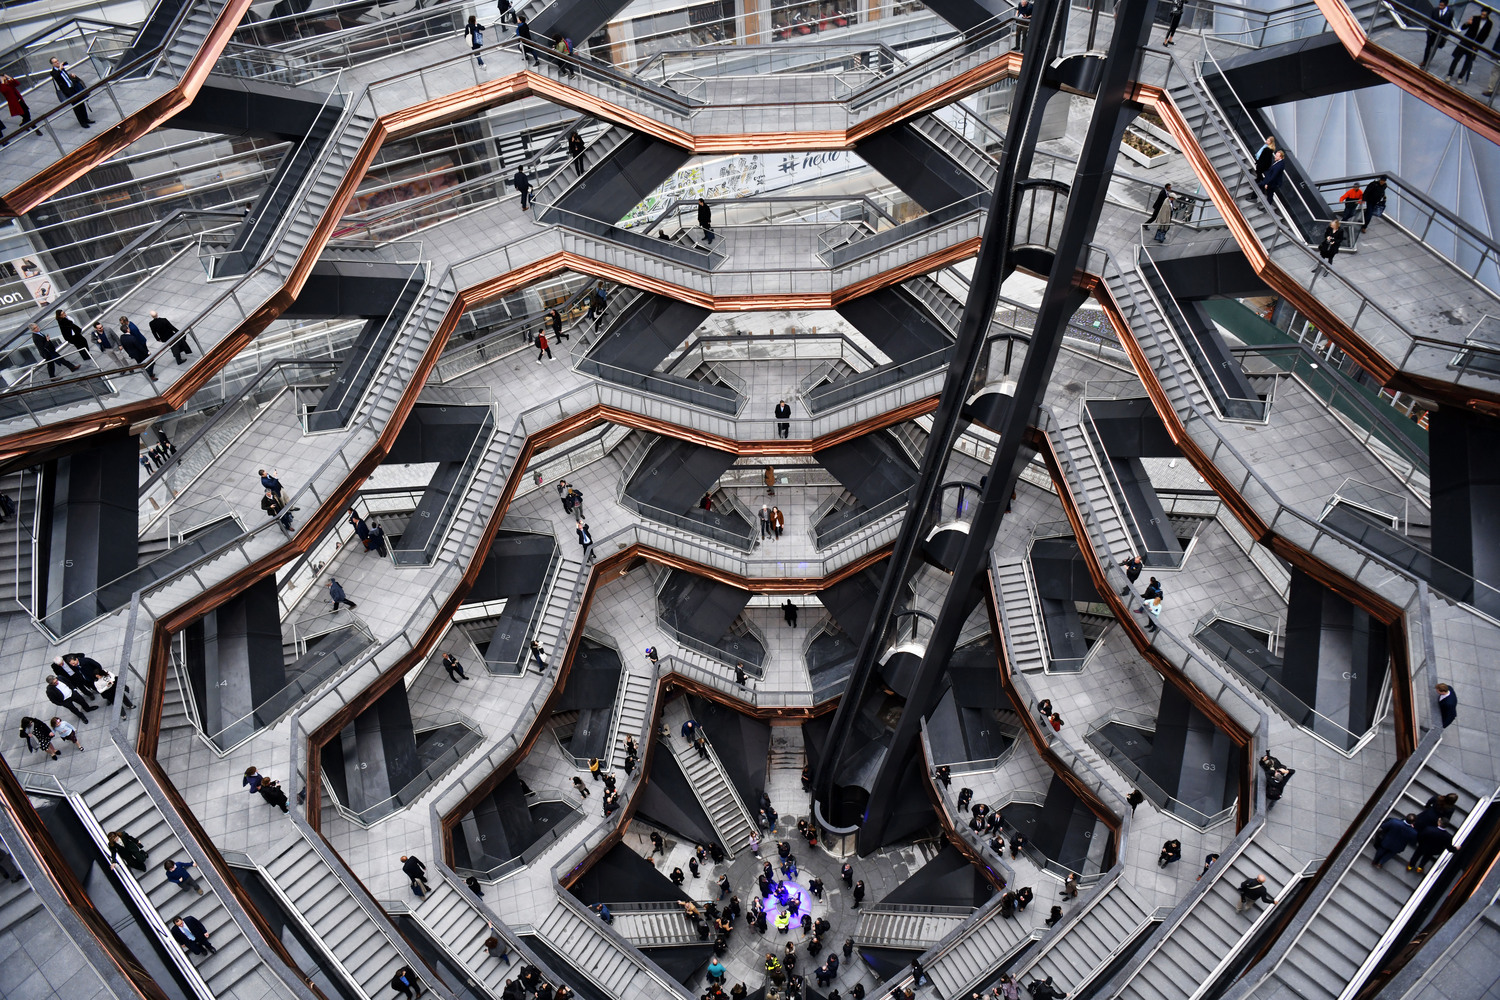 Hudson Yards, New York’s Newest Neighborhood, Official Opening Event